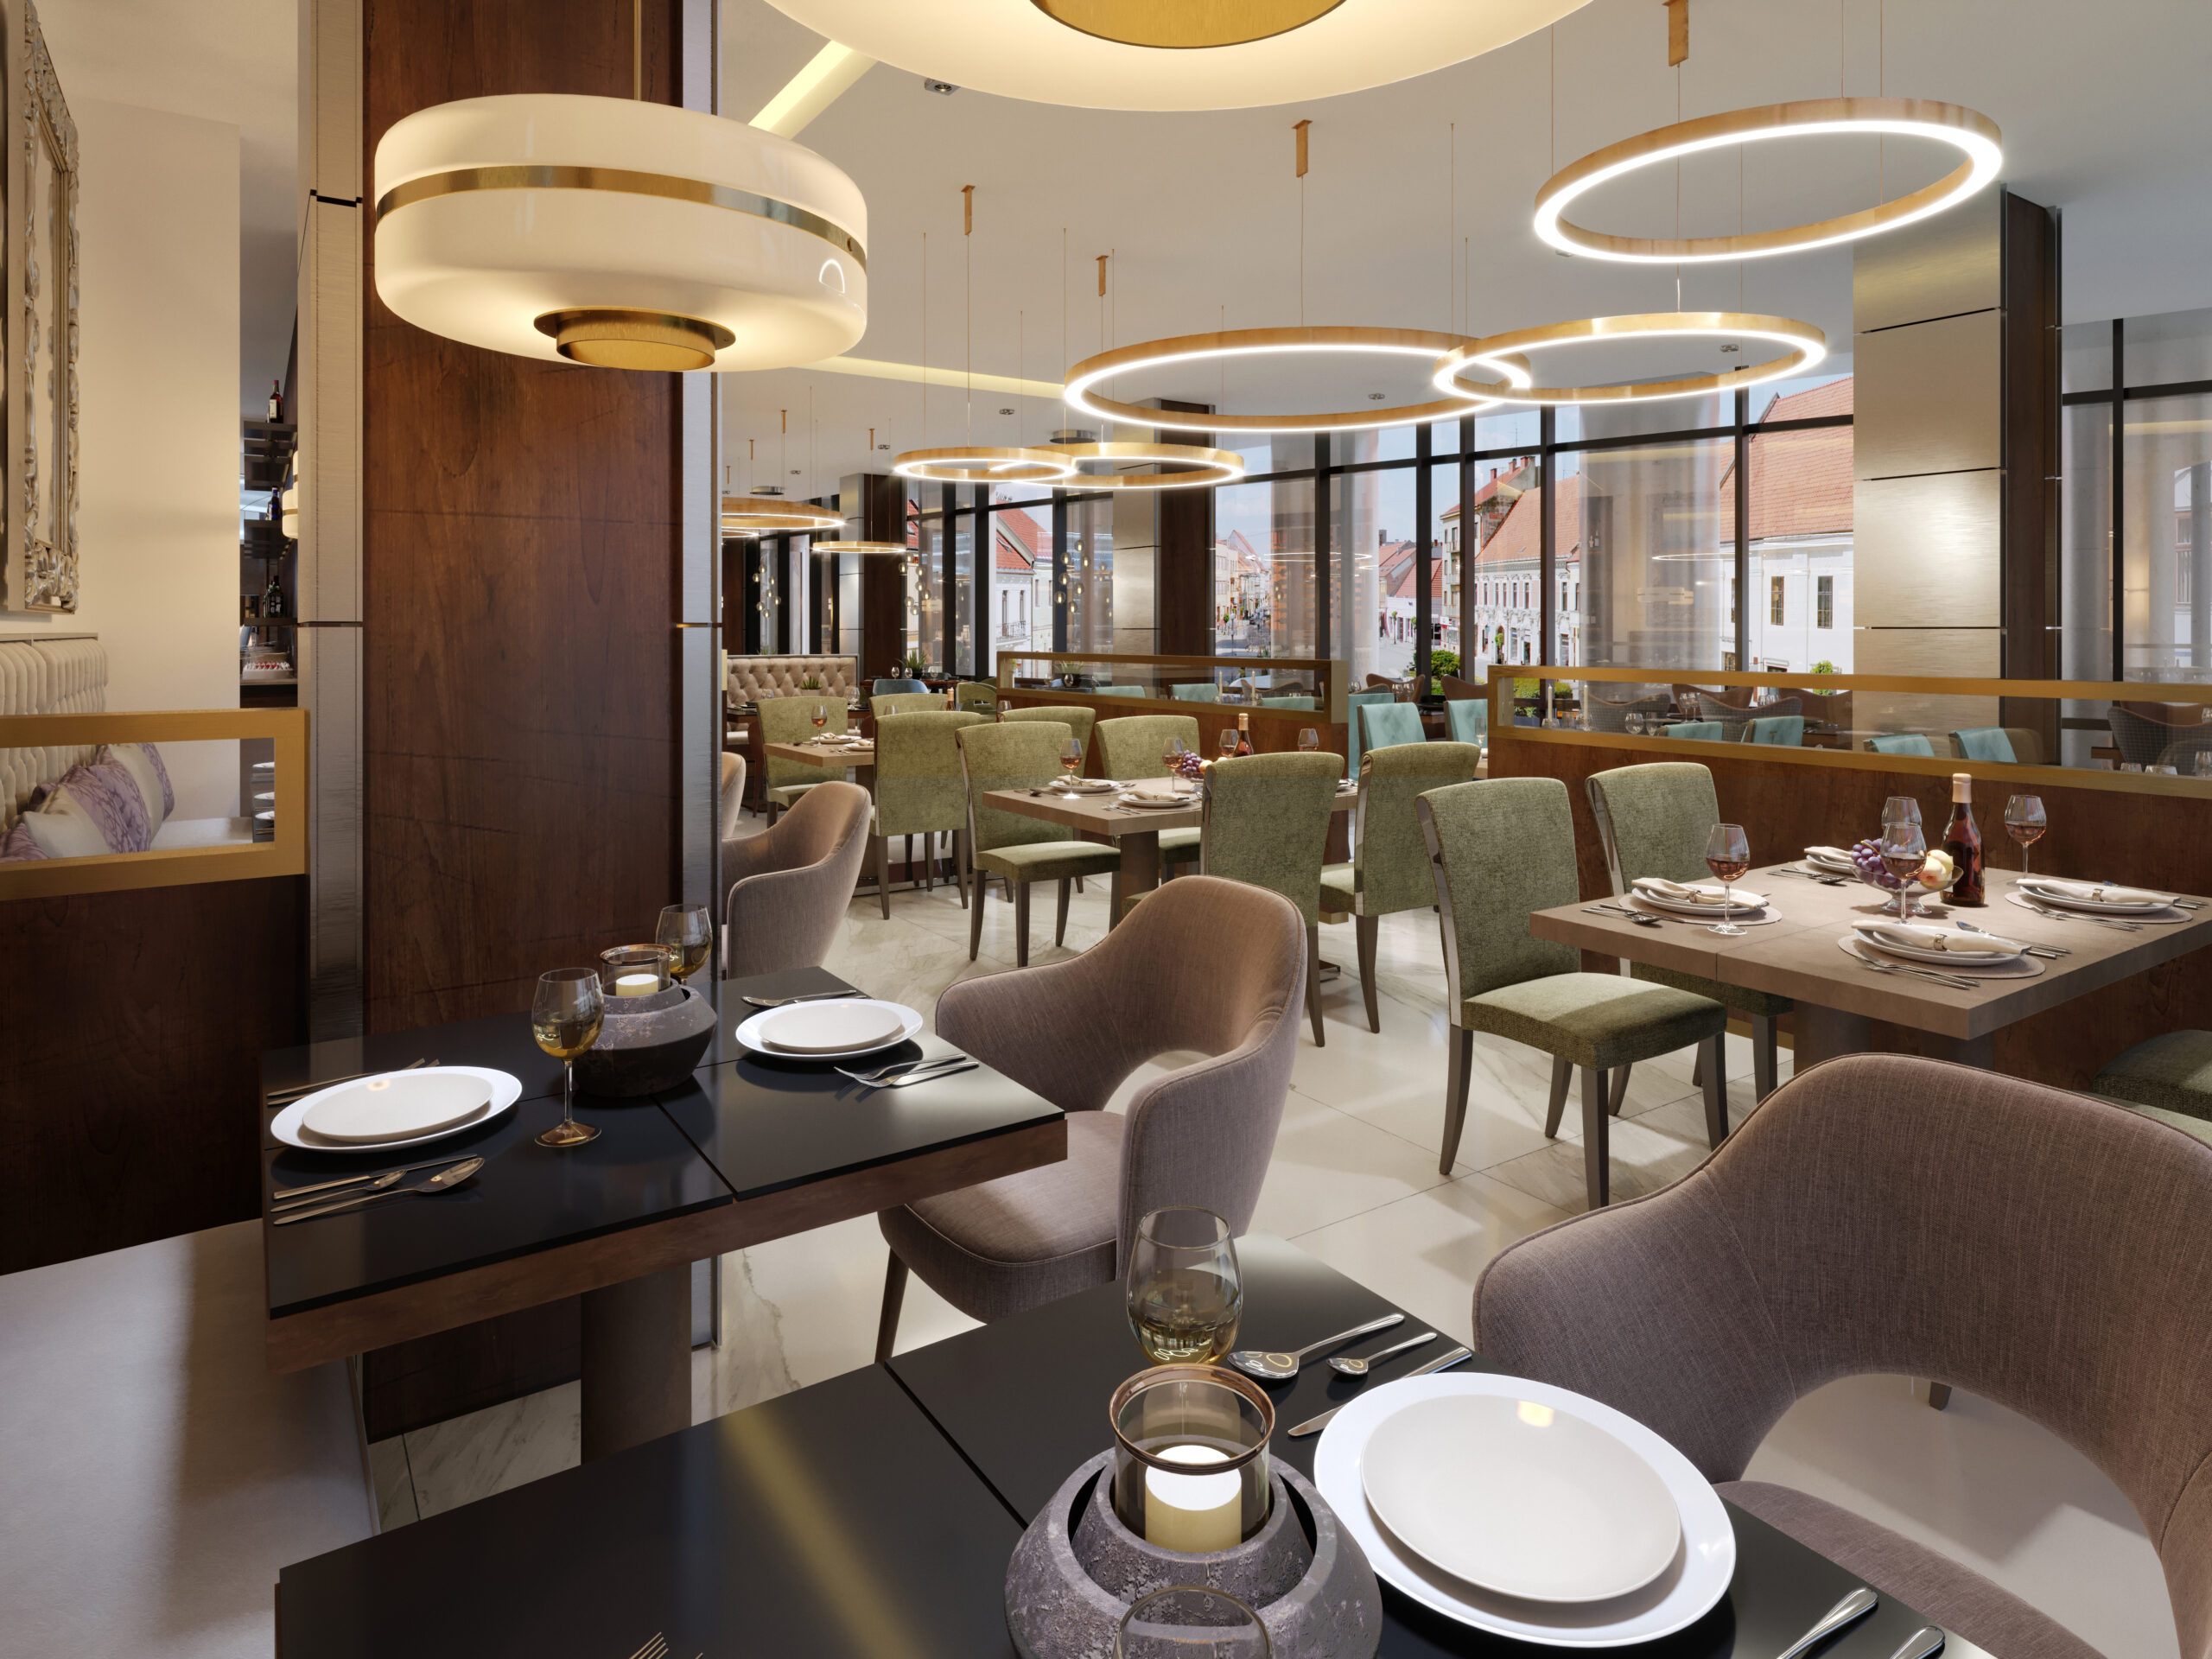 Restaurant in a modern style with marble floor. There are sofas chairs with tables, decorative stainless columns. On ceiling big chandelier with gold circles. Large closet with bottles and light. 3D Rendering